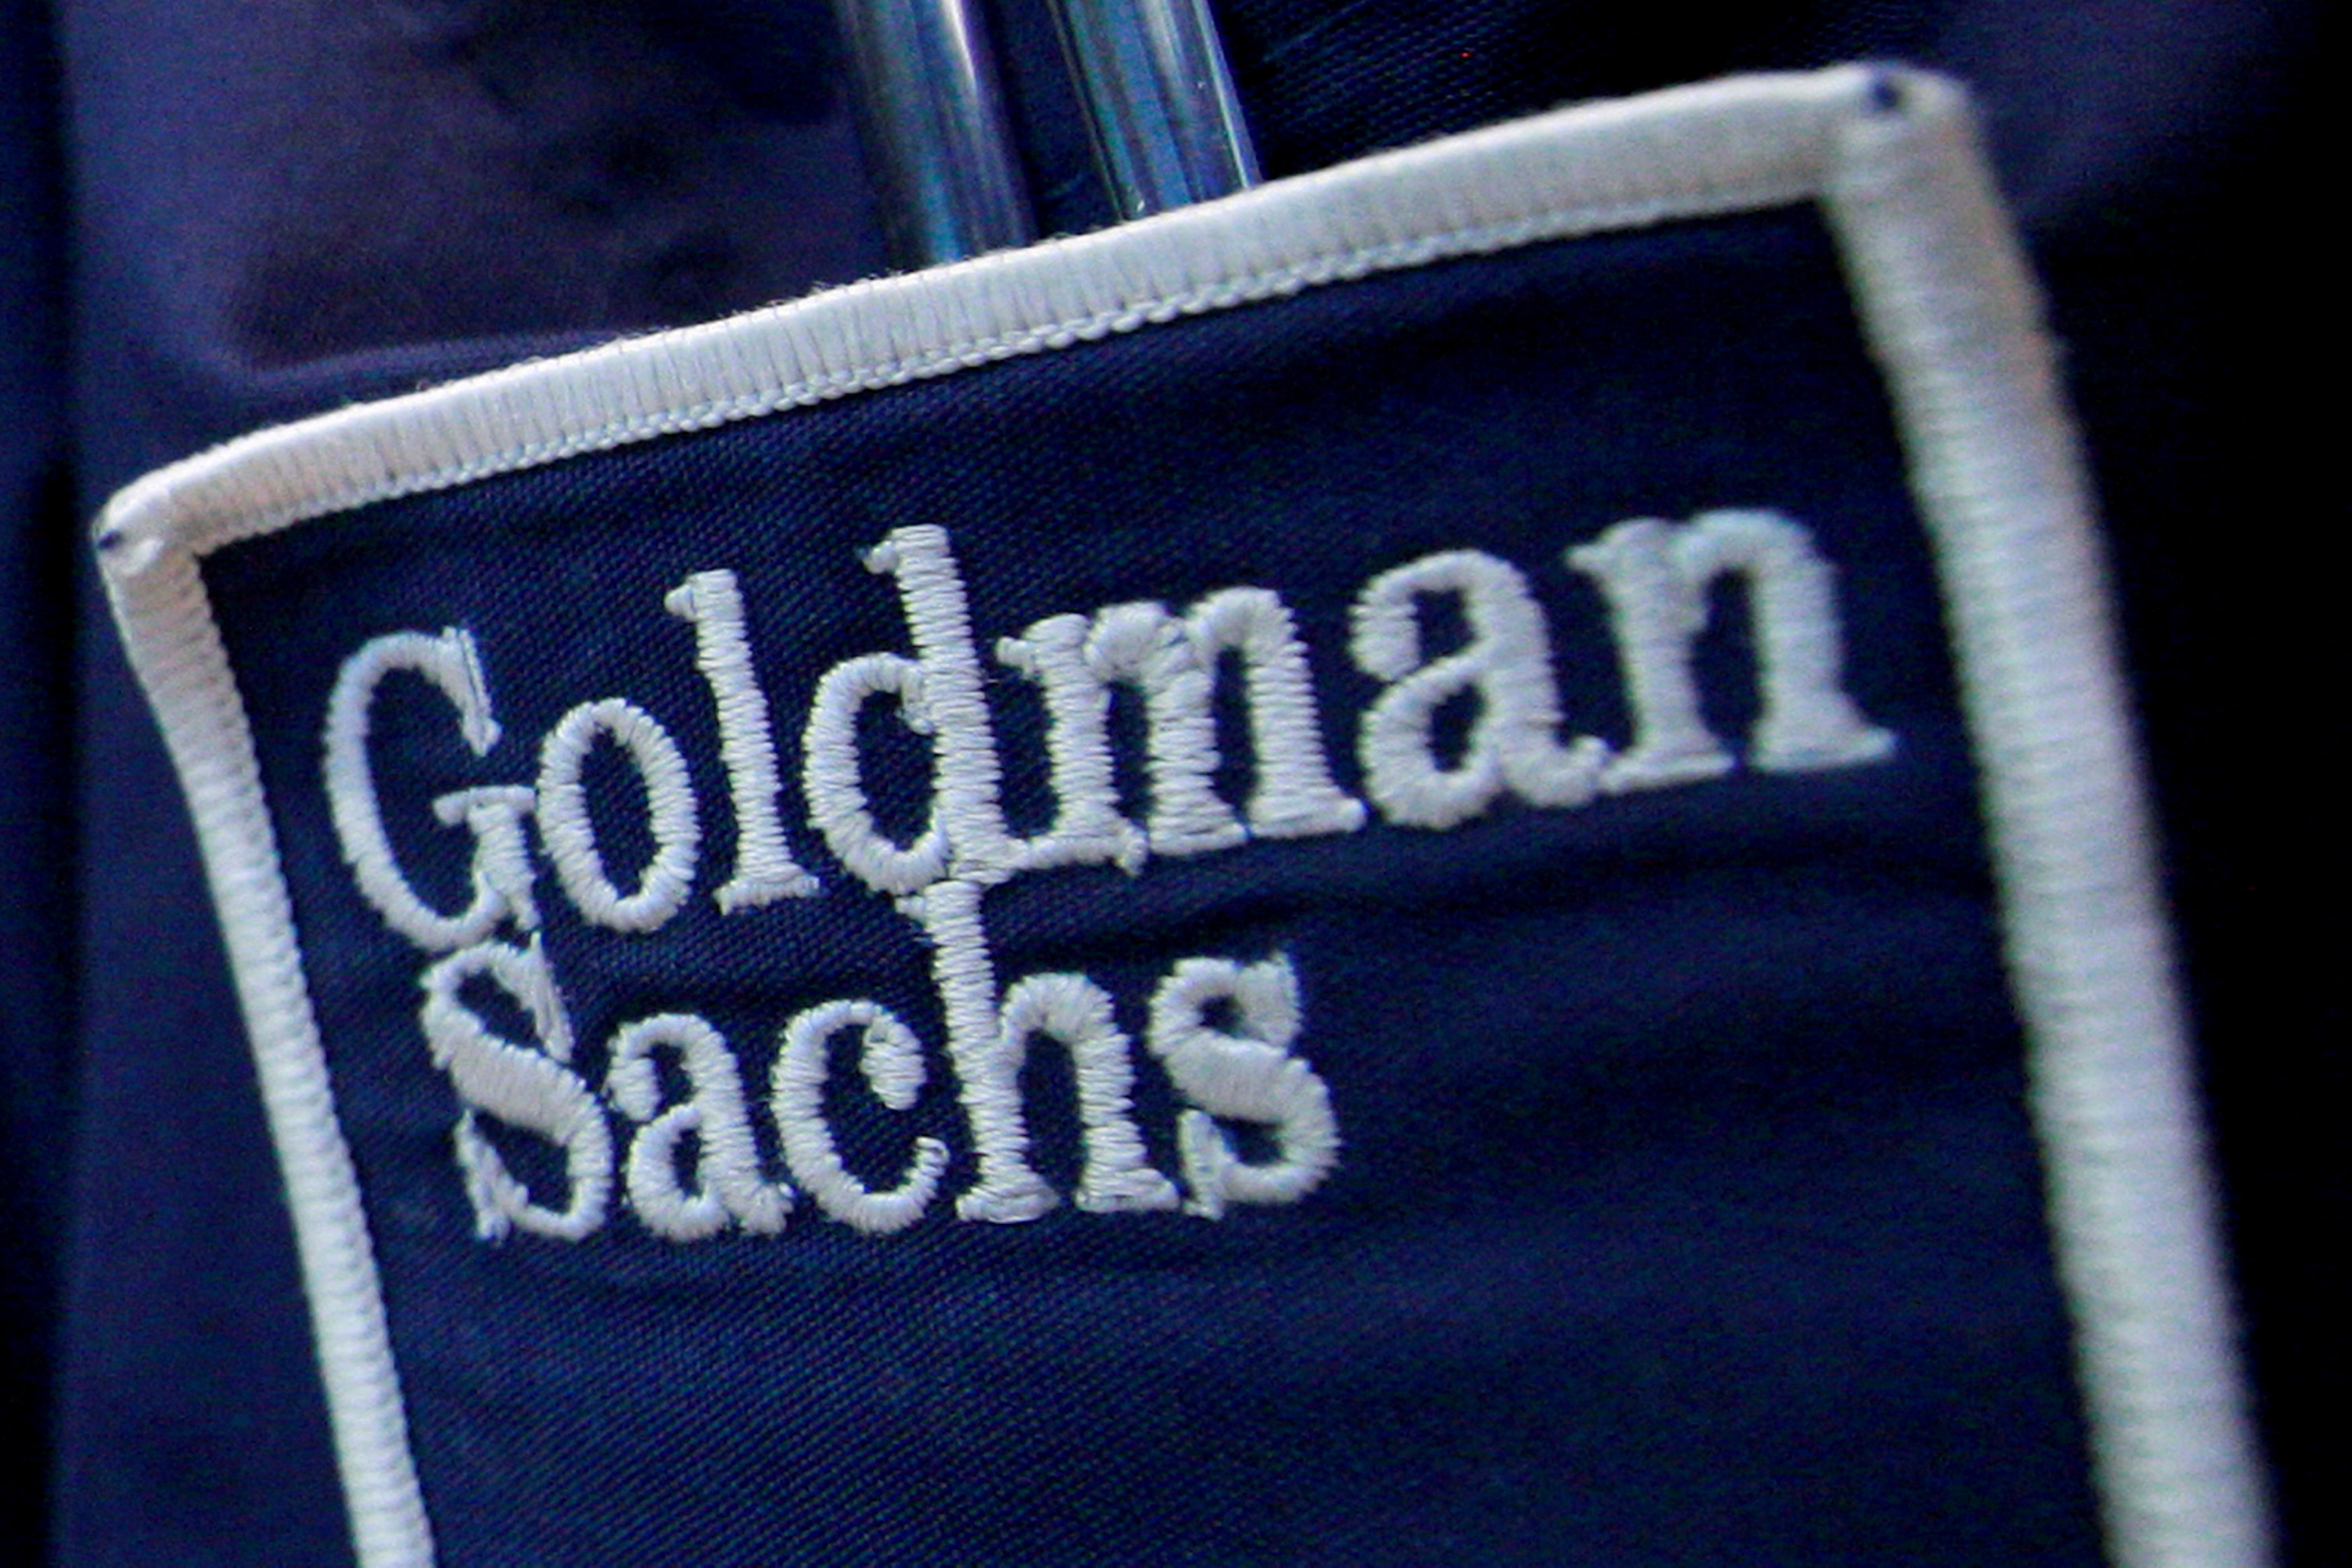 Malaysia files charges against Goldman over 1MDB scandal